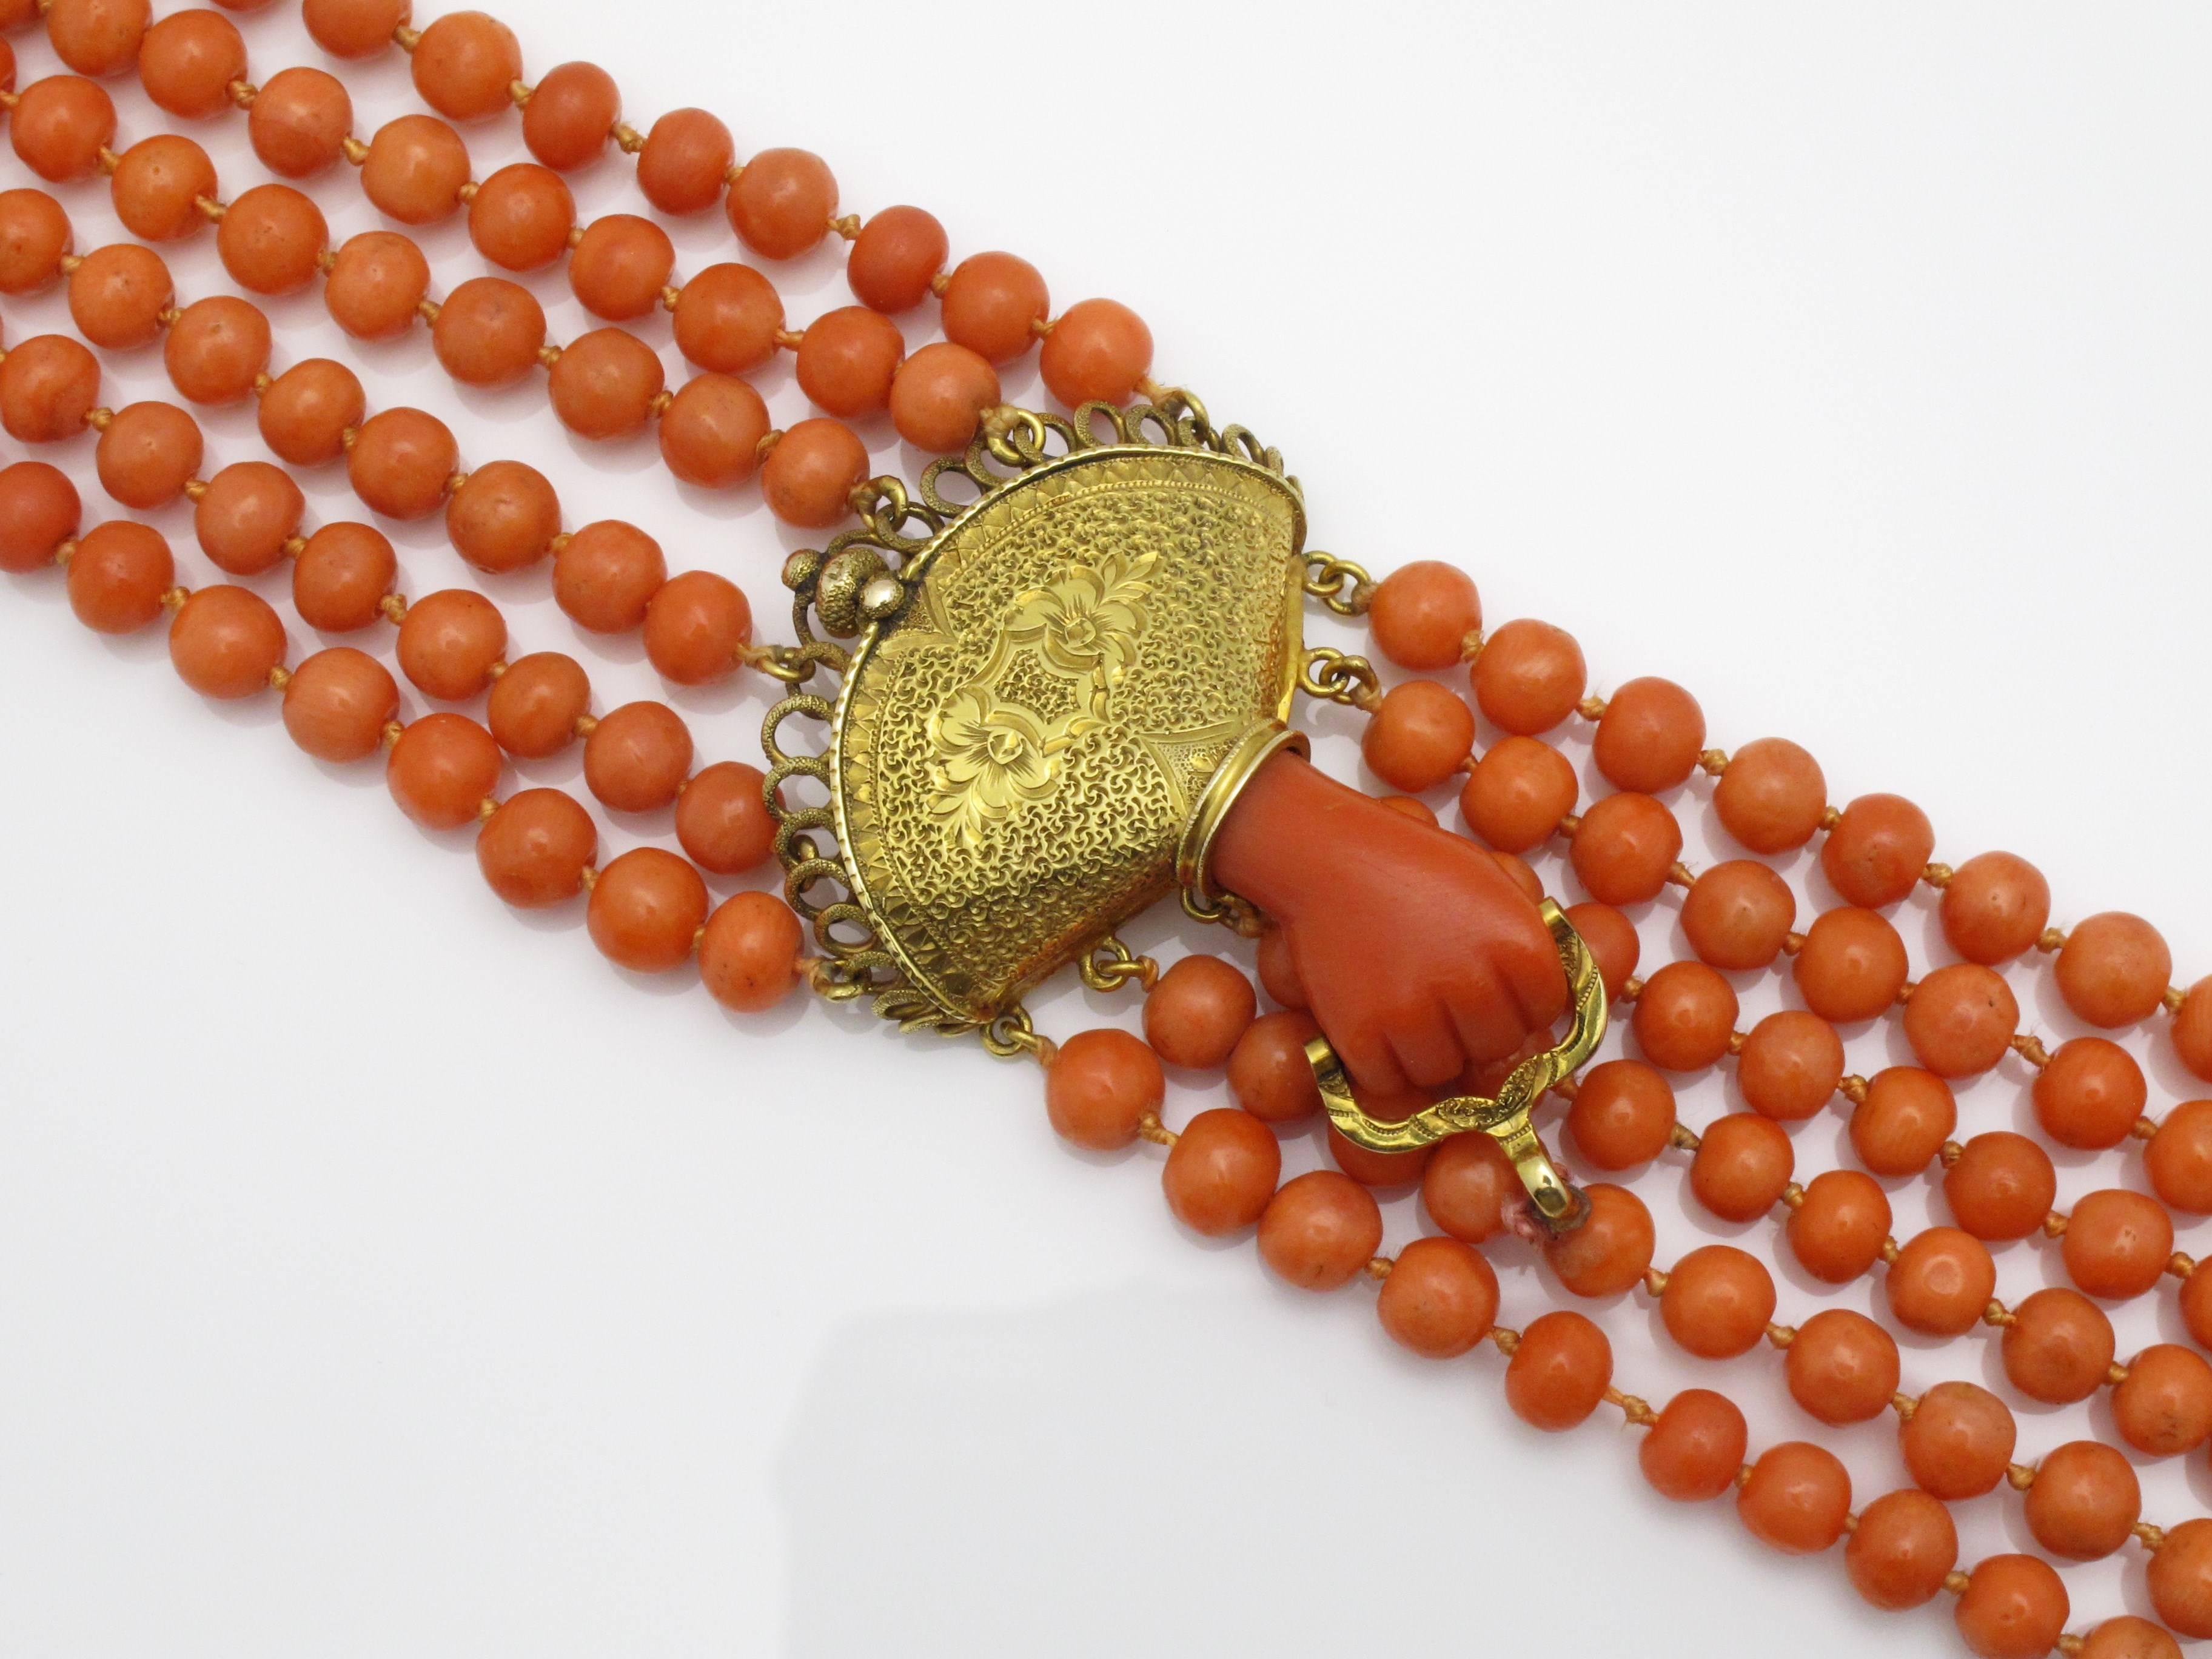 Beautiful Victorian English etched gold and coral bead bracelet with hand grasp motif, c.1870.